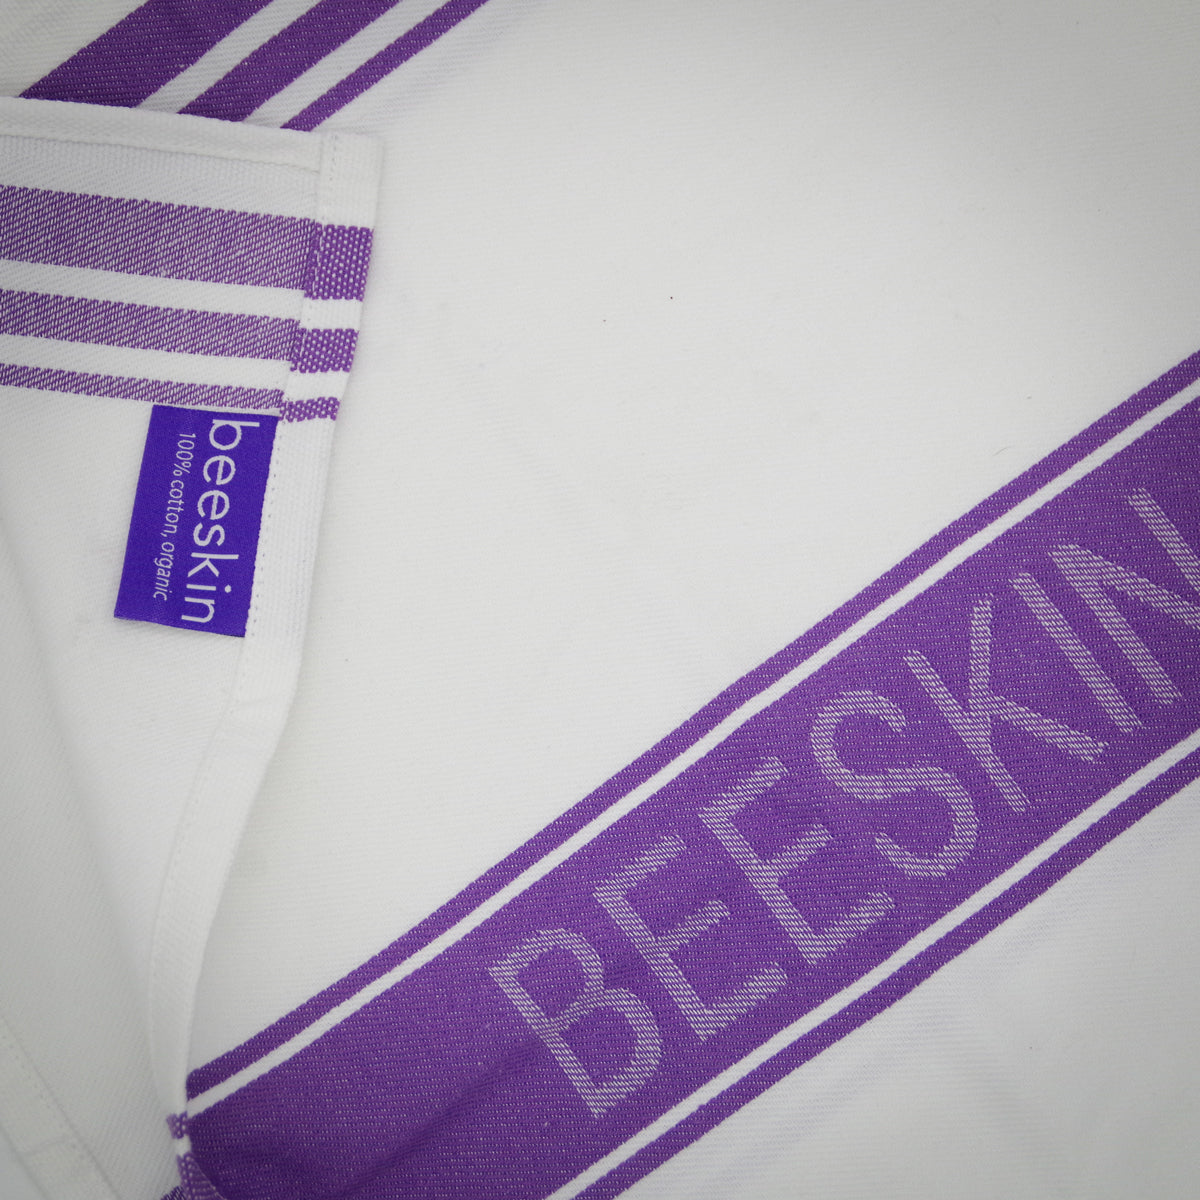 detail of tea towel with beeskin logo and label